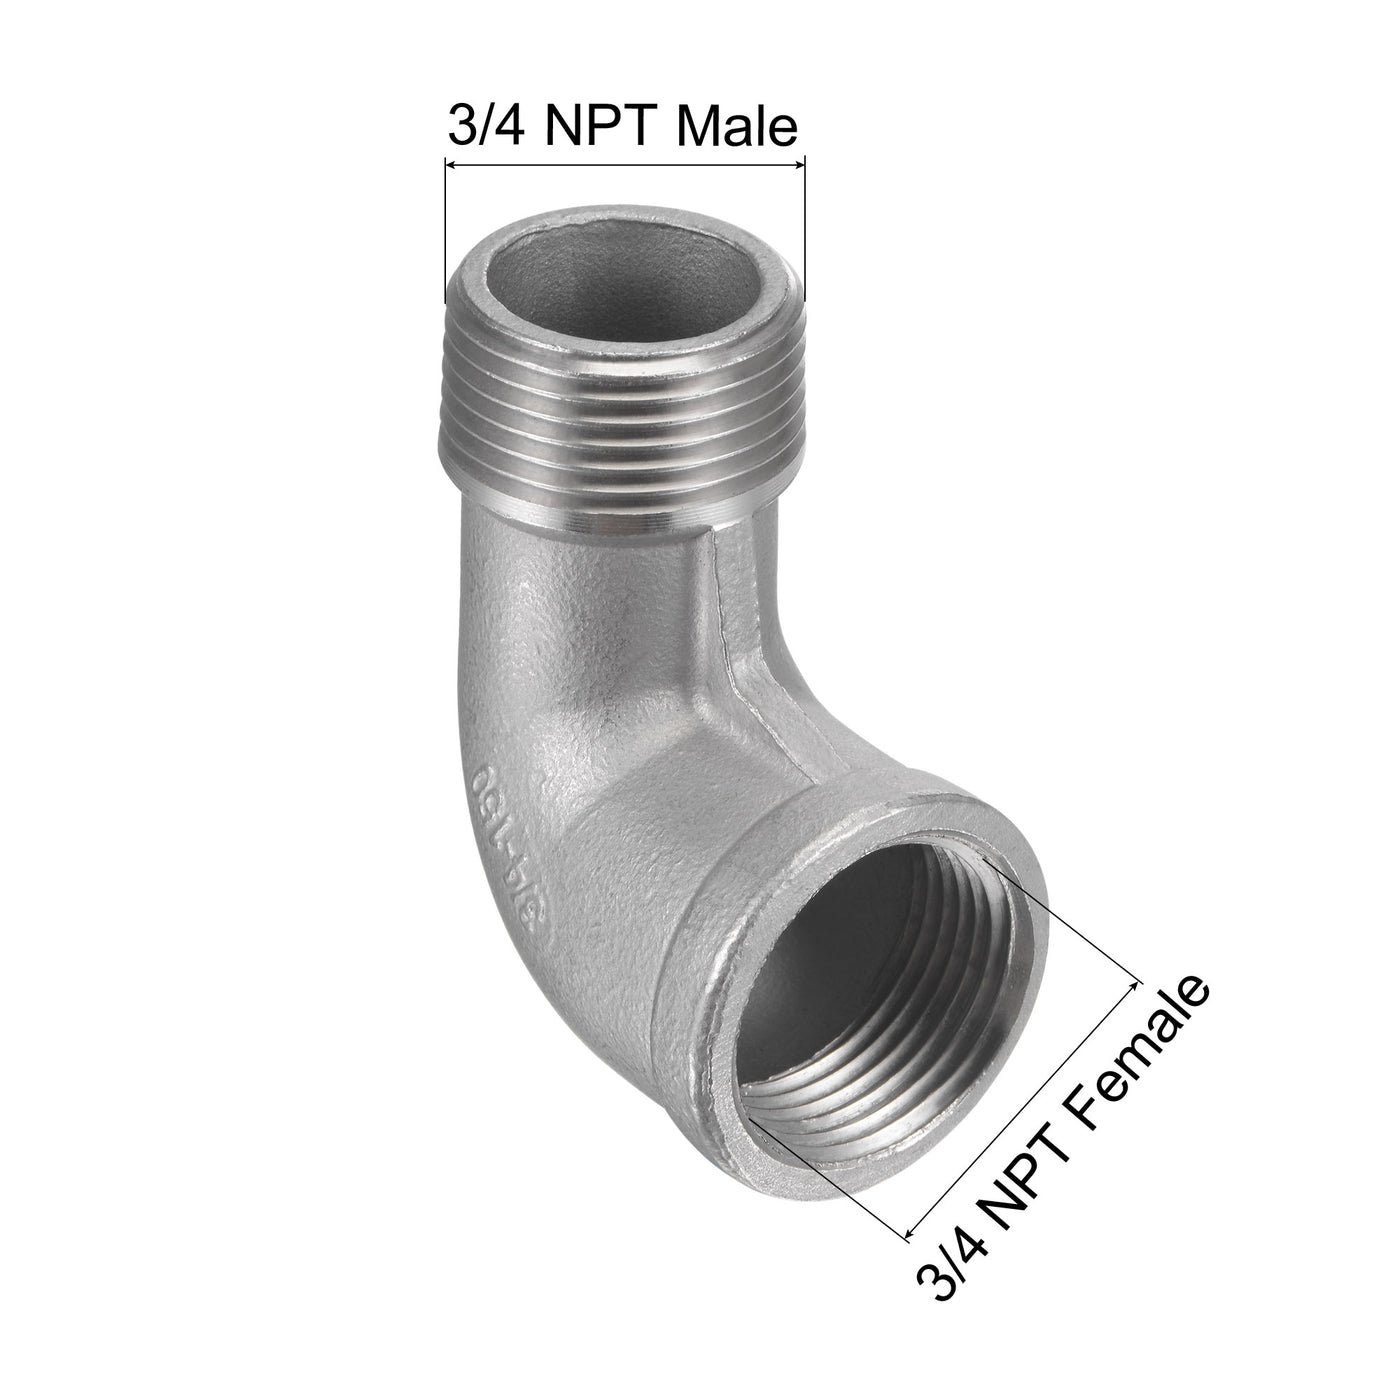 Uxcell Uxcell Pipe Fitting Elbow 1/4 NPT Male to Female Thread Hose Connector Adapter, 304 Stainless Steel